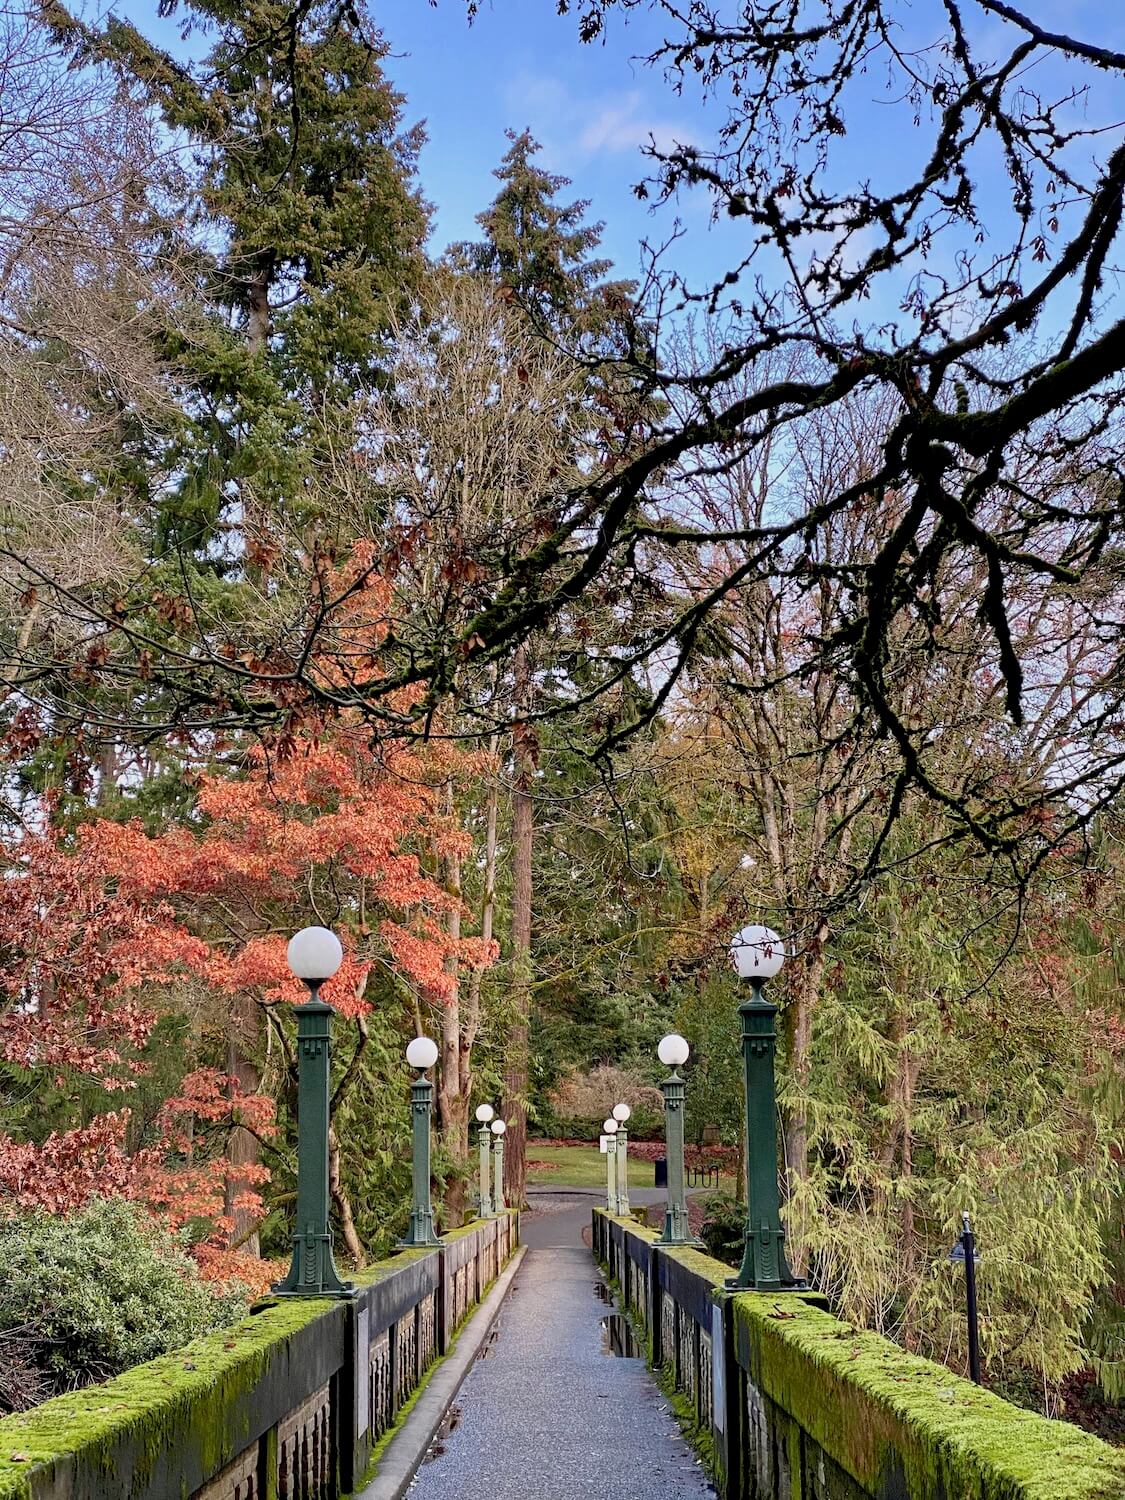 Washington Arboretum is a wonderful  outdoor winter thing to do in Seattle because the colors and textures abound no matter the time of year.  This concrete bridge crosses into the park with thick green moss on the railings as well as eight green lamp posts with round white bulbs at the top.  There are still a few trees with orange leaves clinging on to fall white many other empty branches flow around fir tree needles. 